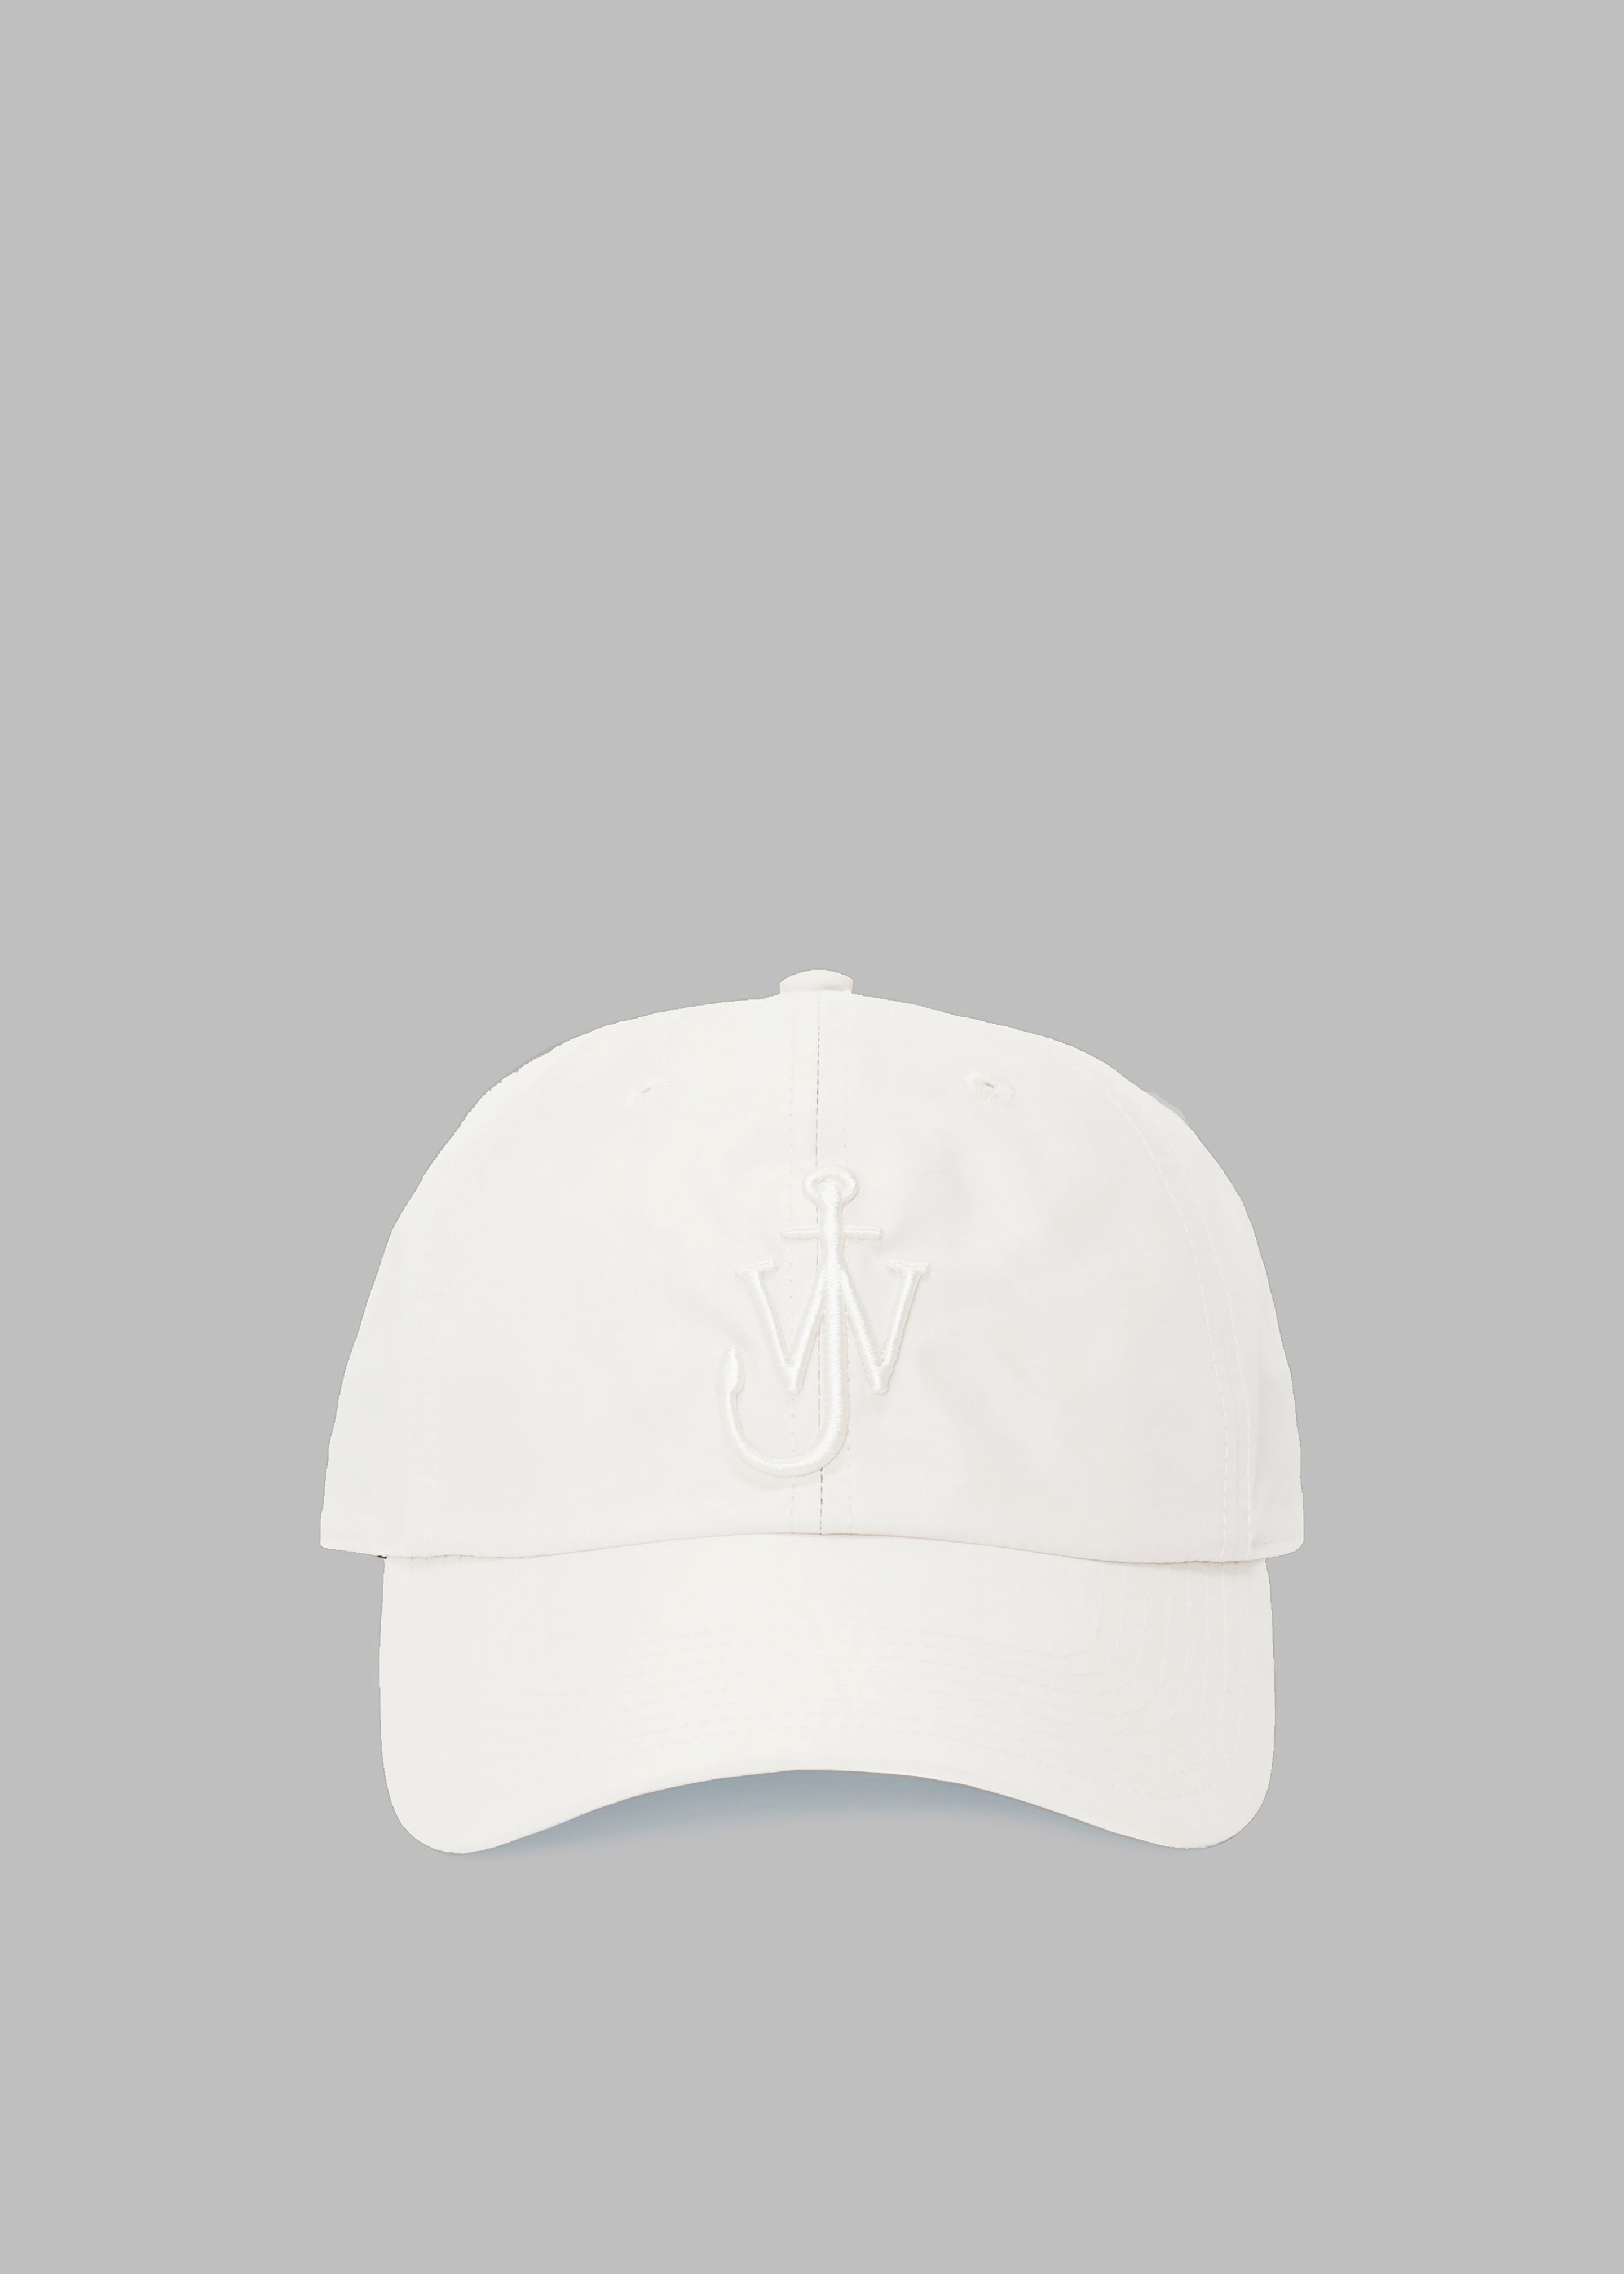 JW Anderson Baseball Cap With Anchor Logo - White - 1